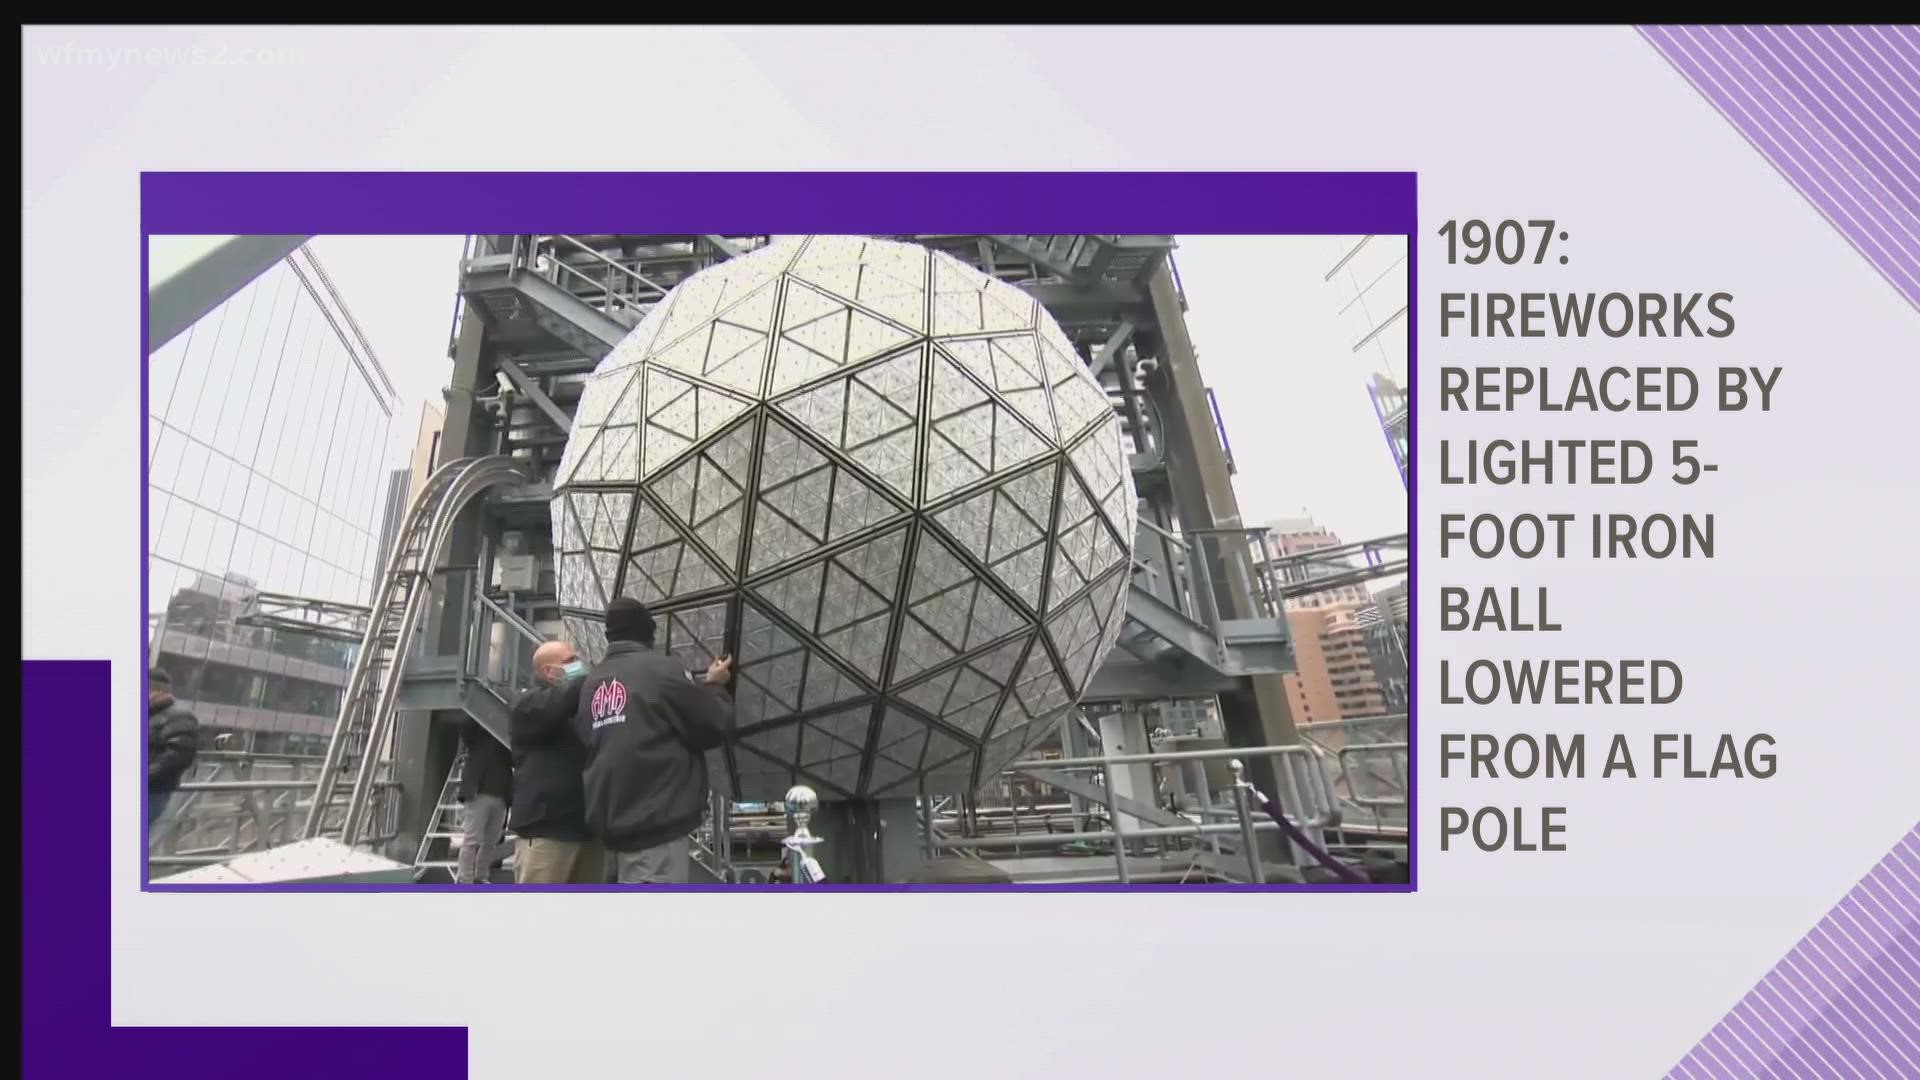 New York's Times Square ball drop started in the early 1900s.